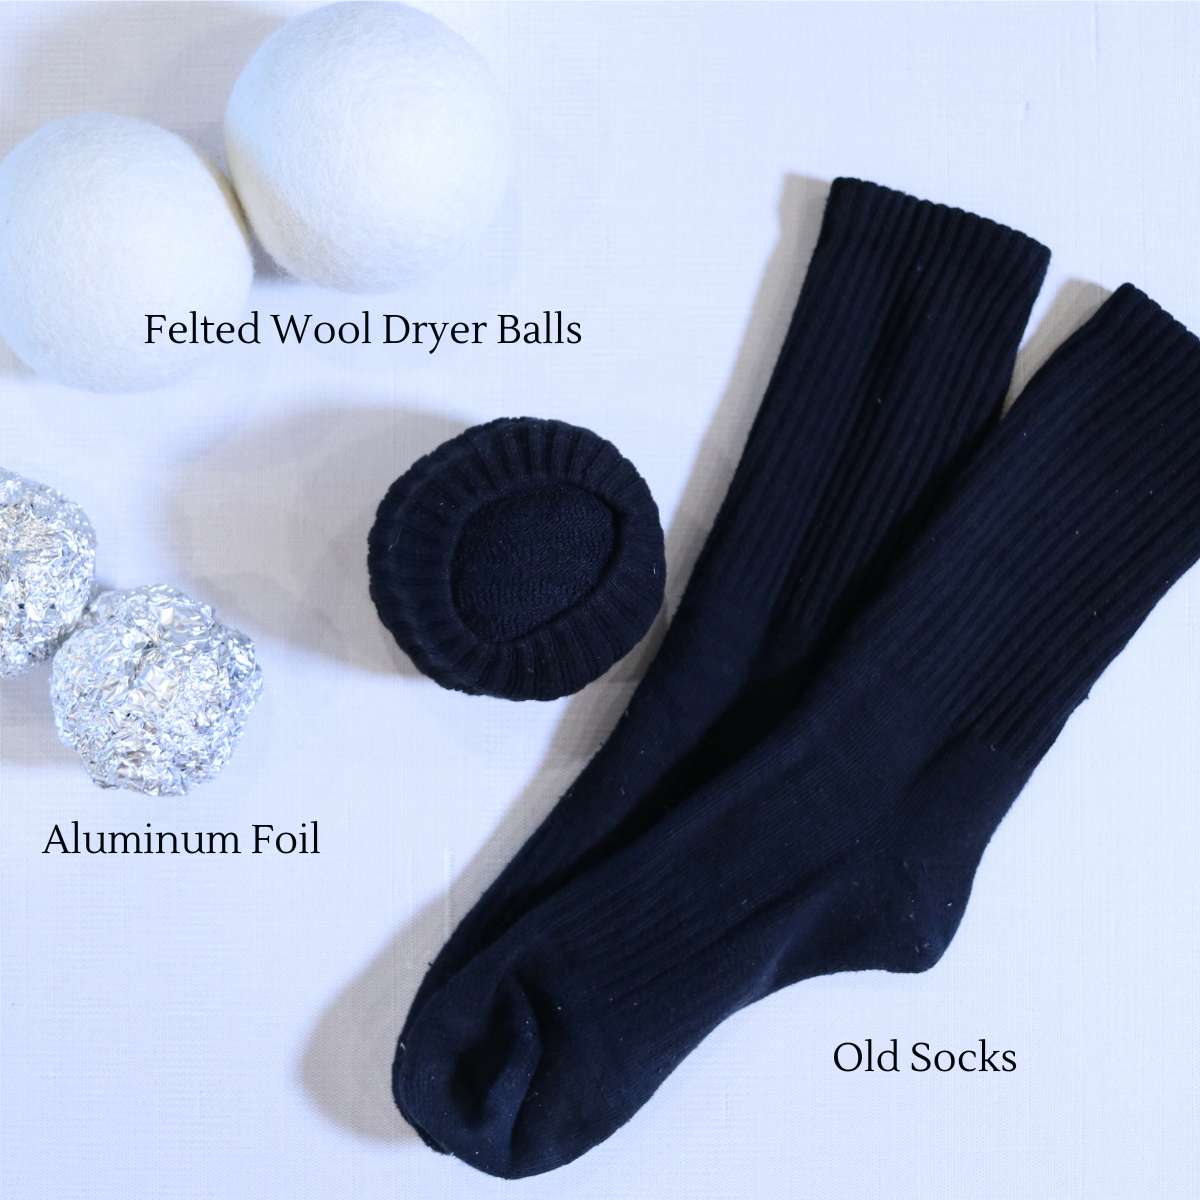 A picture showing three other dryer sheet alternatives. The pictures includes two white wool dryer balls, two balls of aluminum foil, and a pair of black socks next to a black ball of socks. All three options can be used in place of conventional dryer sheets.